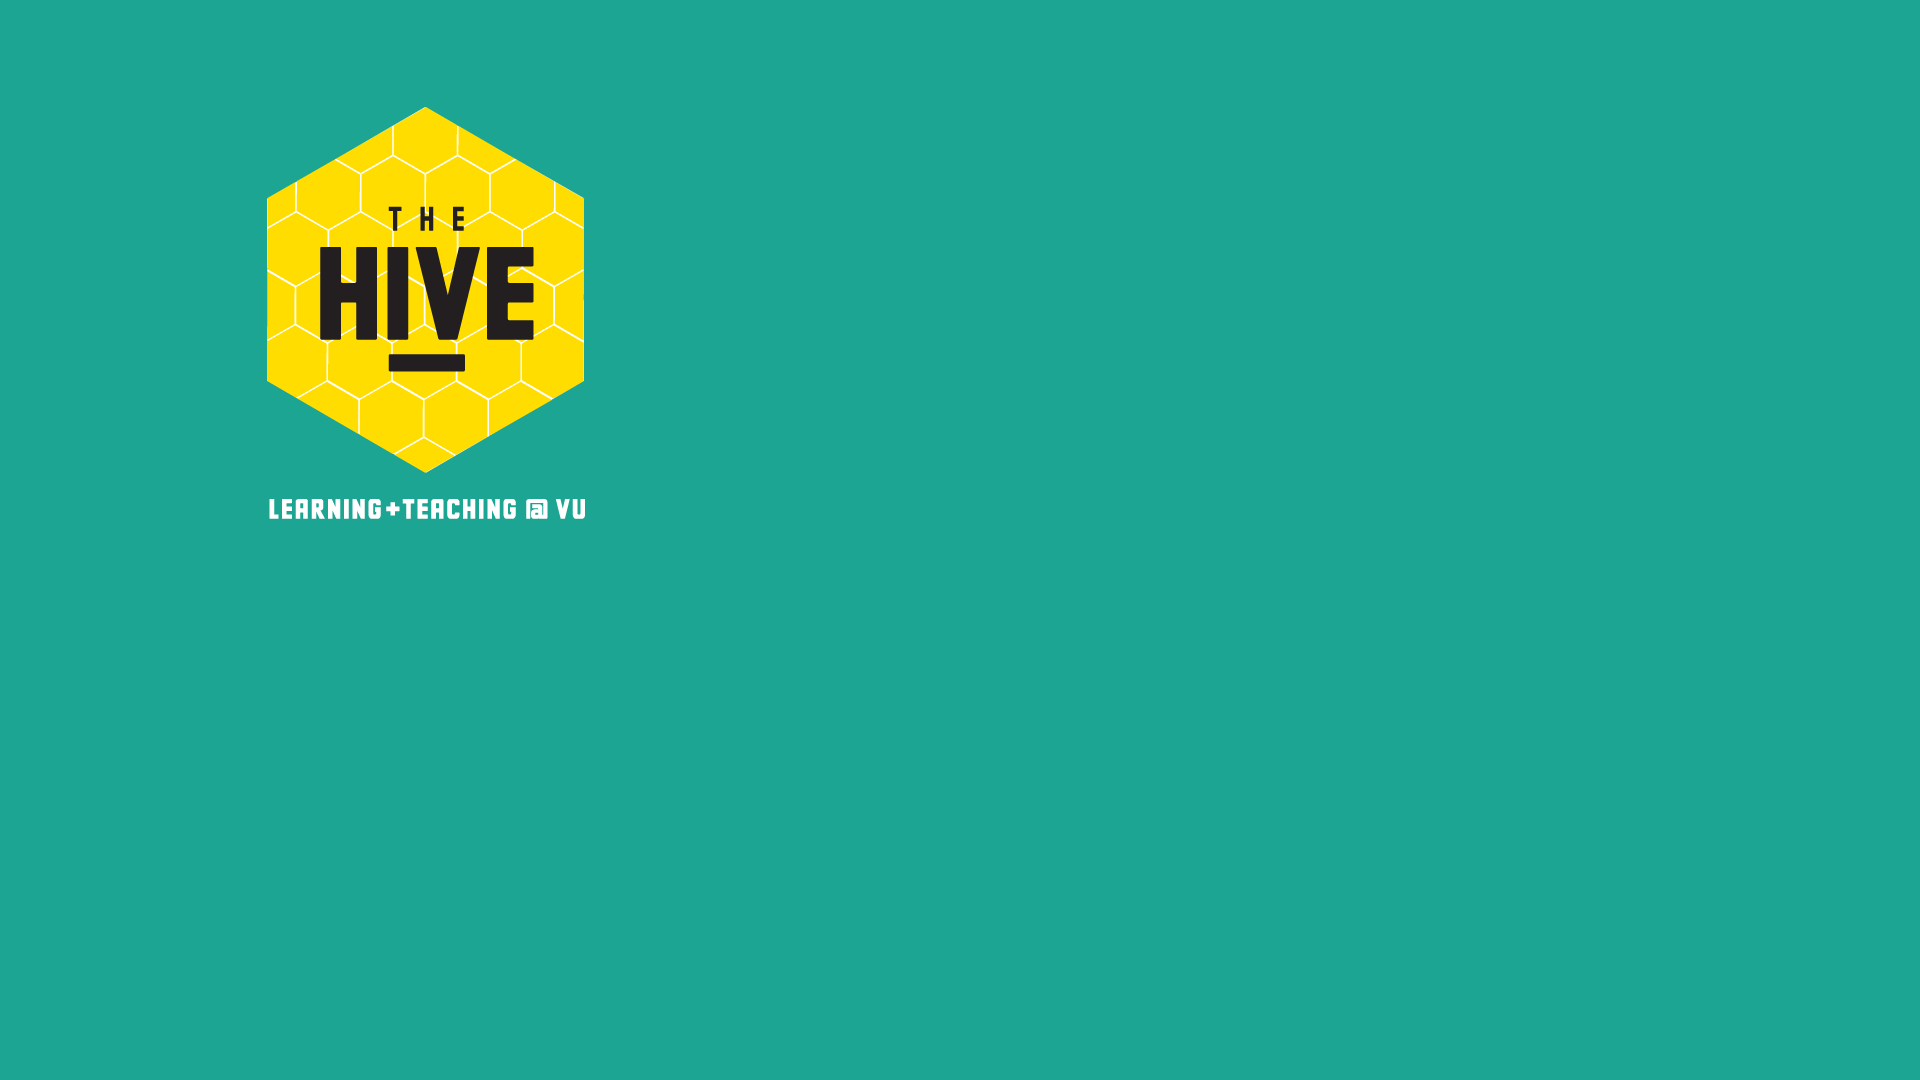 Zoom Virtual Background with The Hive logo